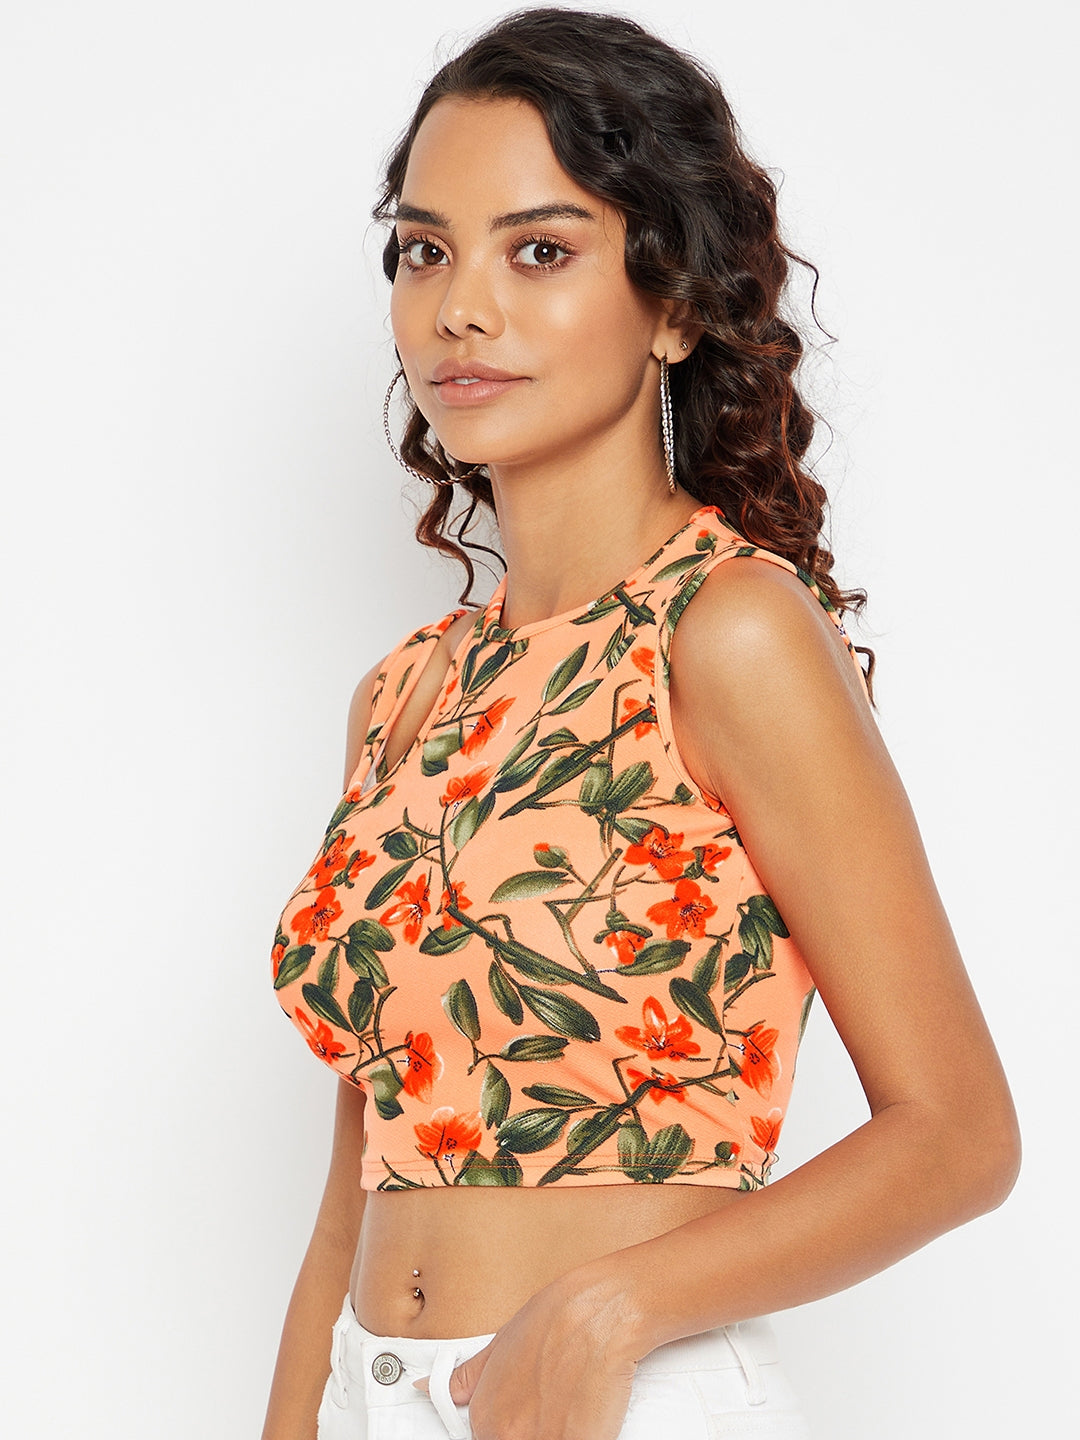 Printed Cotton Stretchable Shoulder Cutout Crop Top - Uptownie